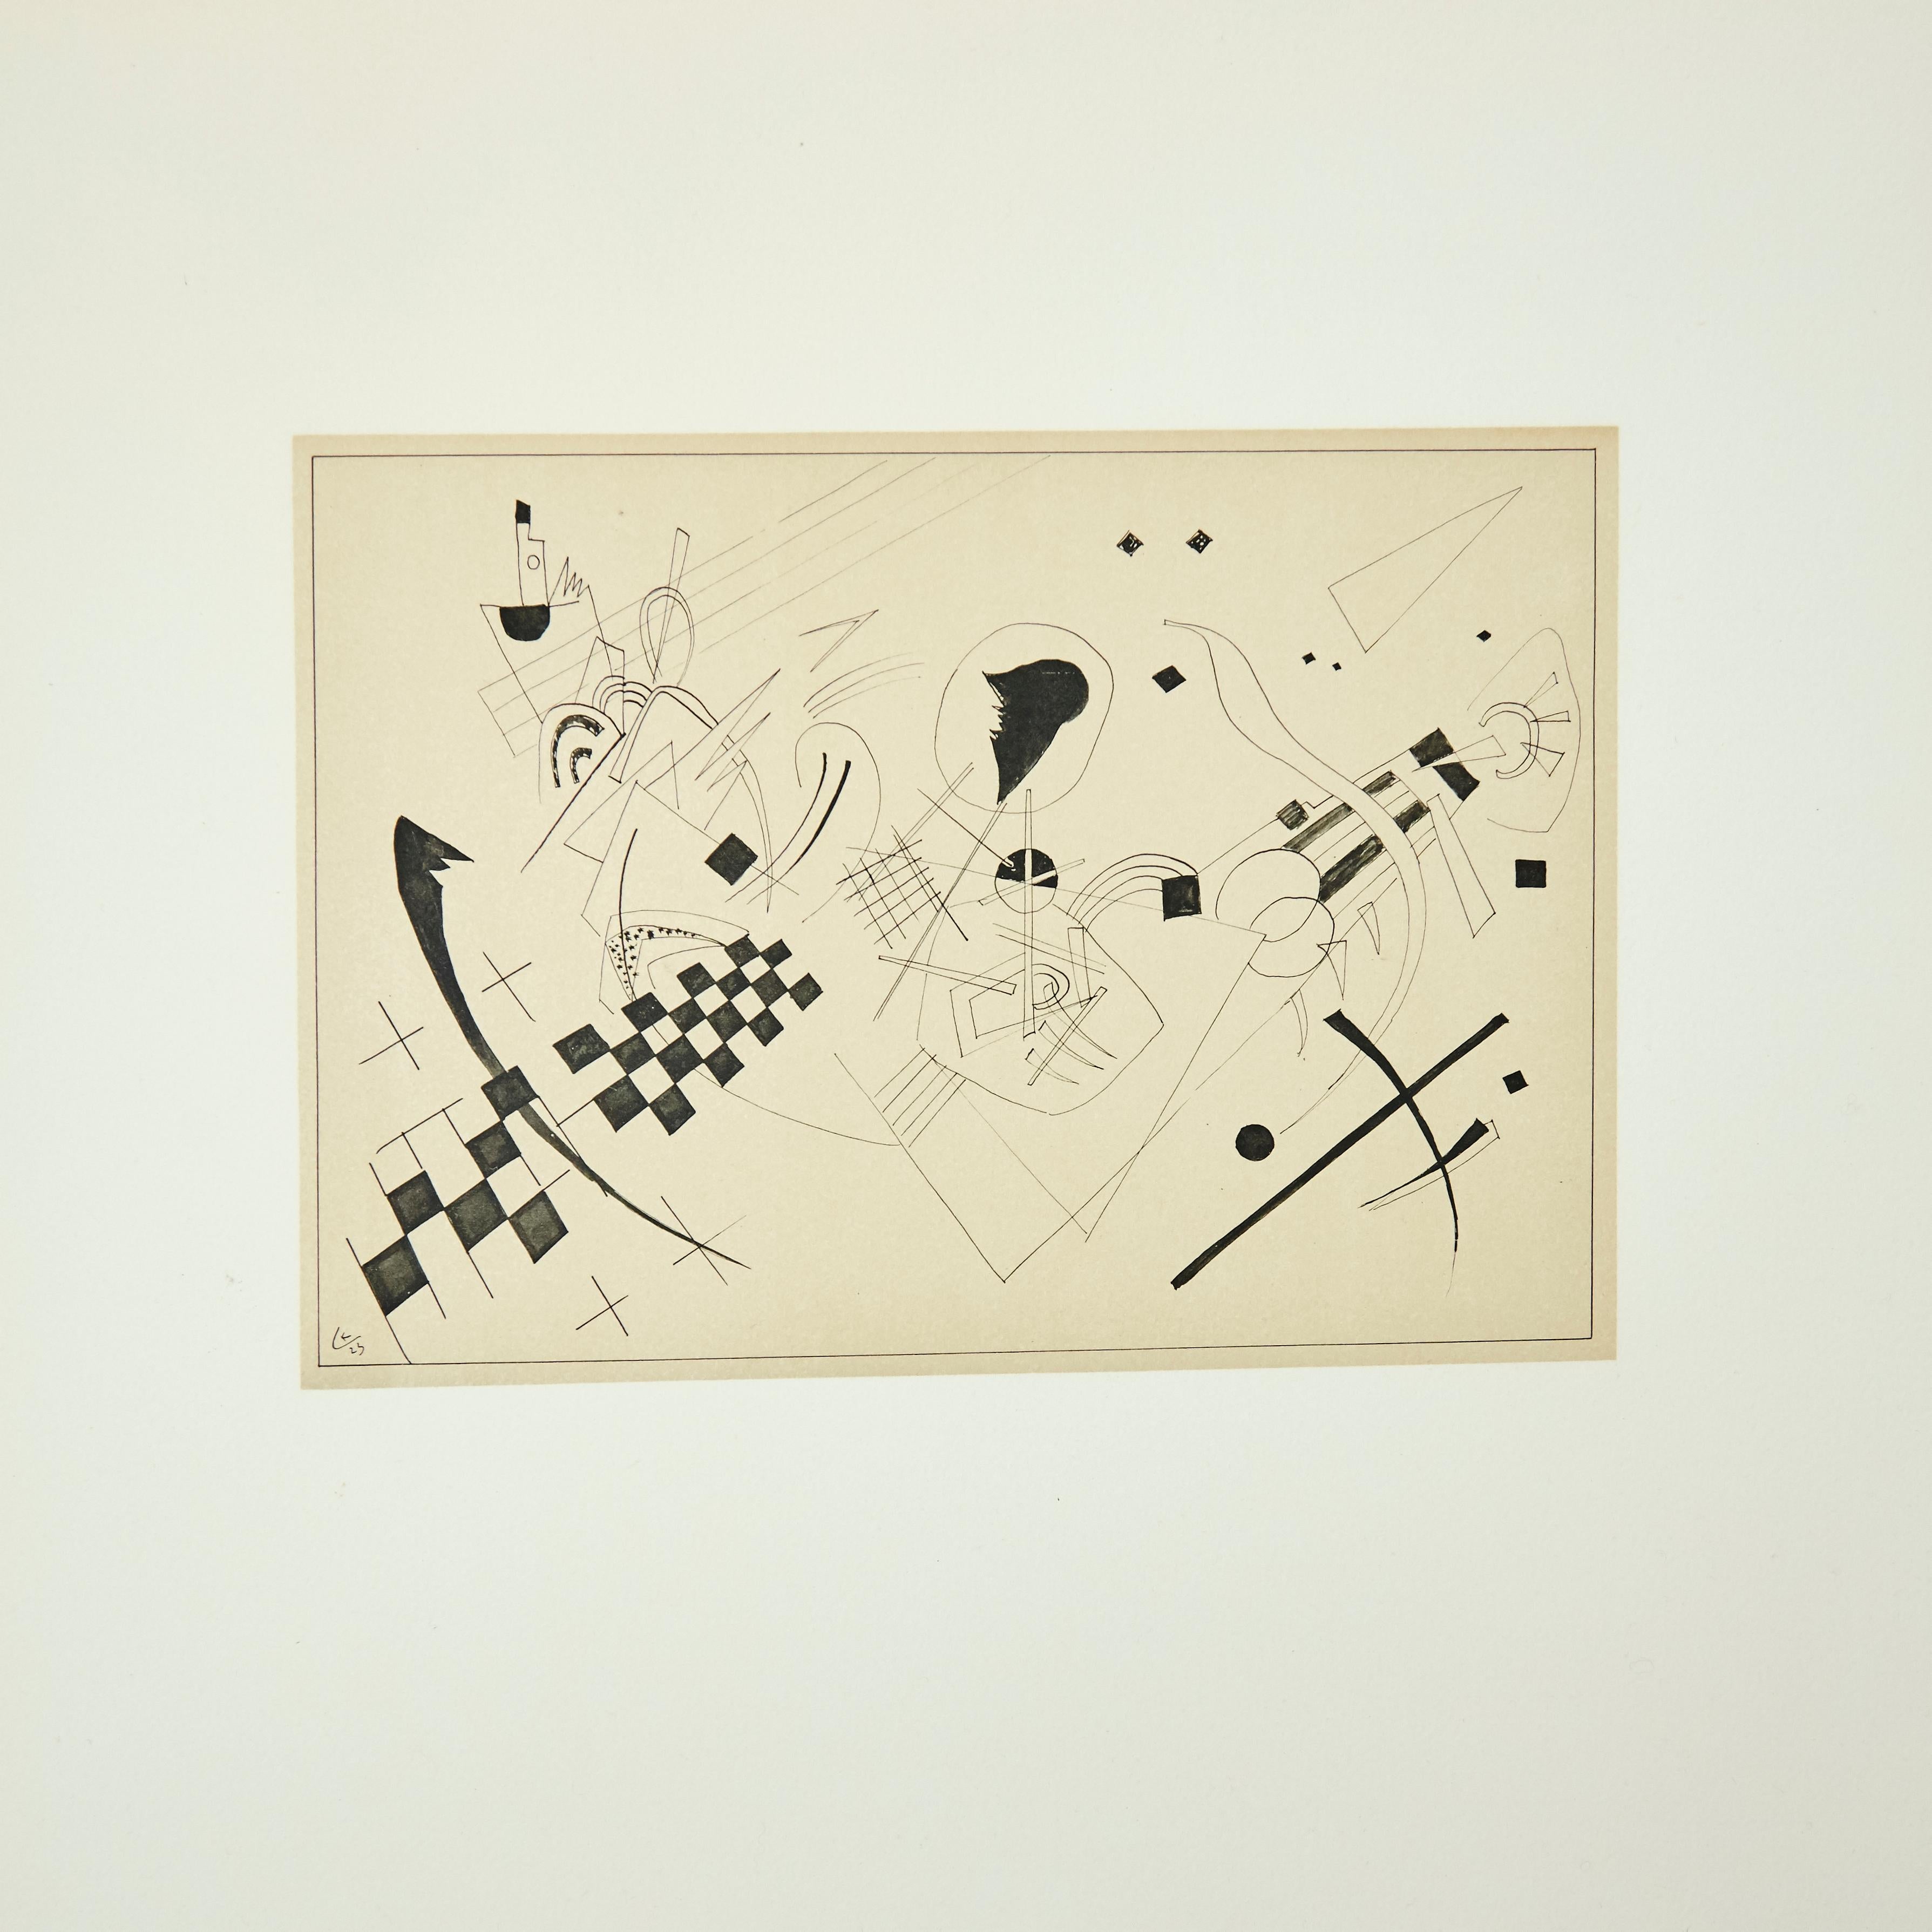 Vasily Kandinsky abstract etching, circa 1960.
In original condition, with minor wear consistent with age and use, preserving a beautiful patina.

Certified and signed on the back by the wife of Kandinsky.

Material:
Paper

Dimensions:
W